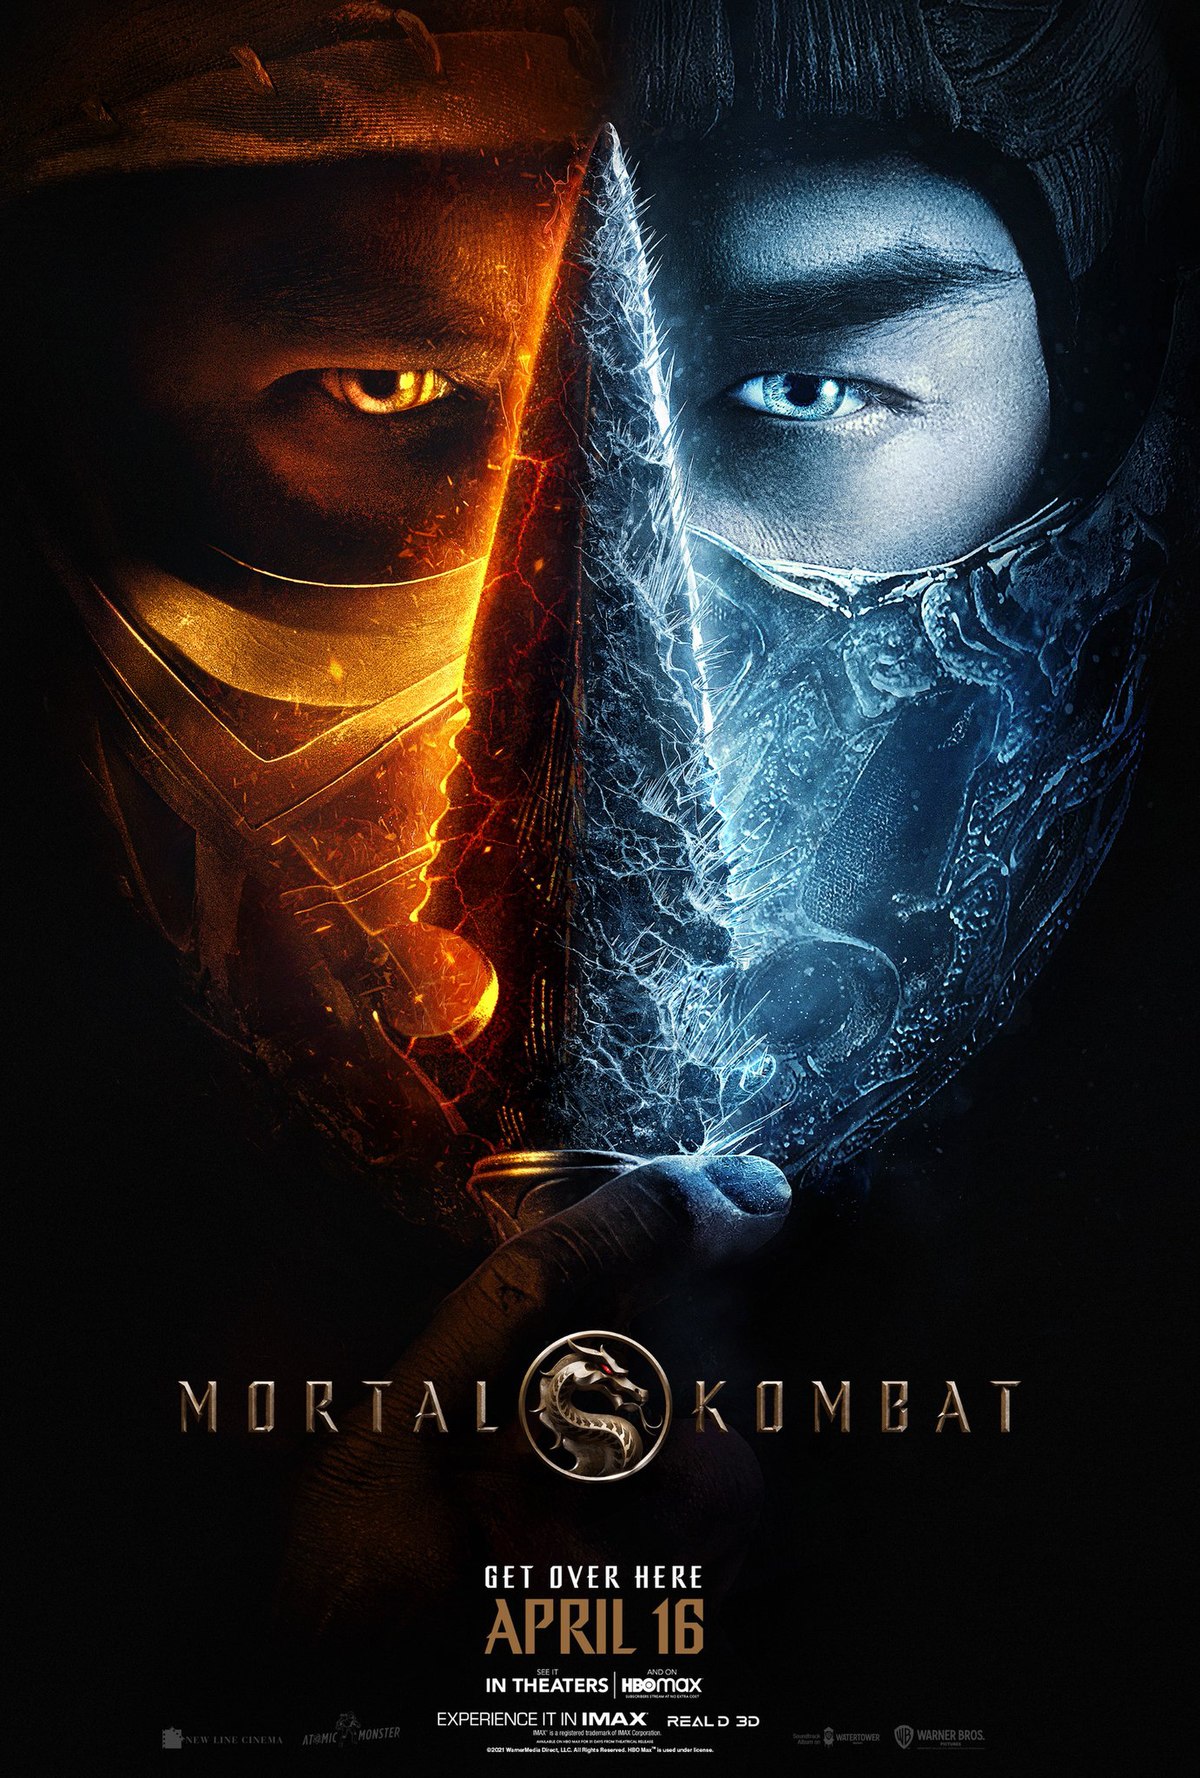 First Mortal Kombat Trailer For Upcoming Movie Released